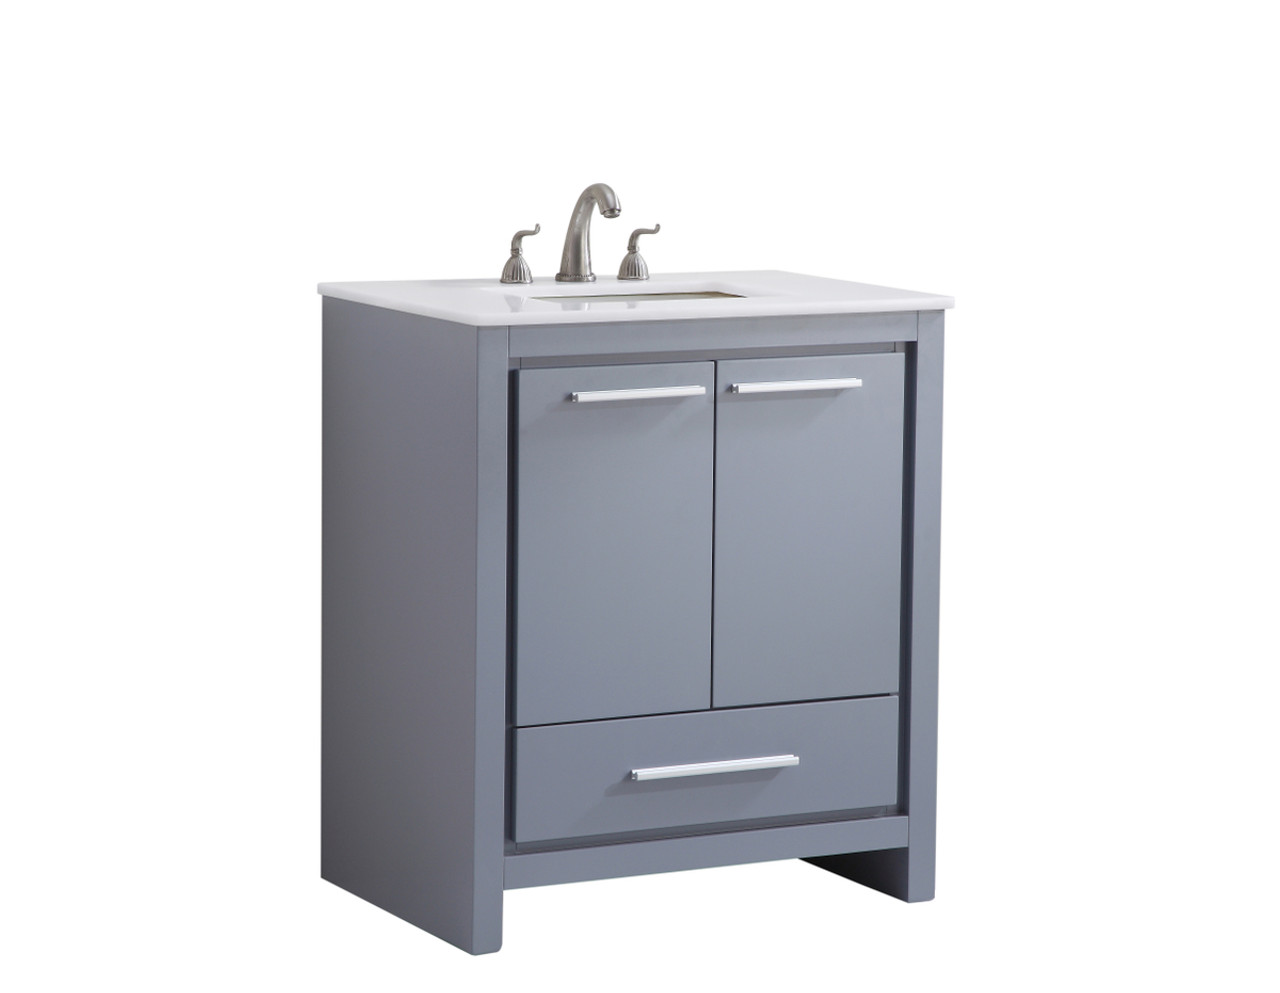 Elegant Kitchen and Bath VF-1028-VW 30 inch Single Bathroom vanity in Grey with ivory white engineered marble